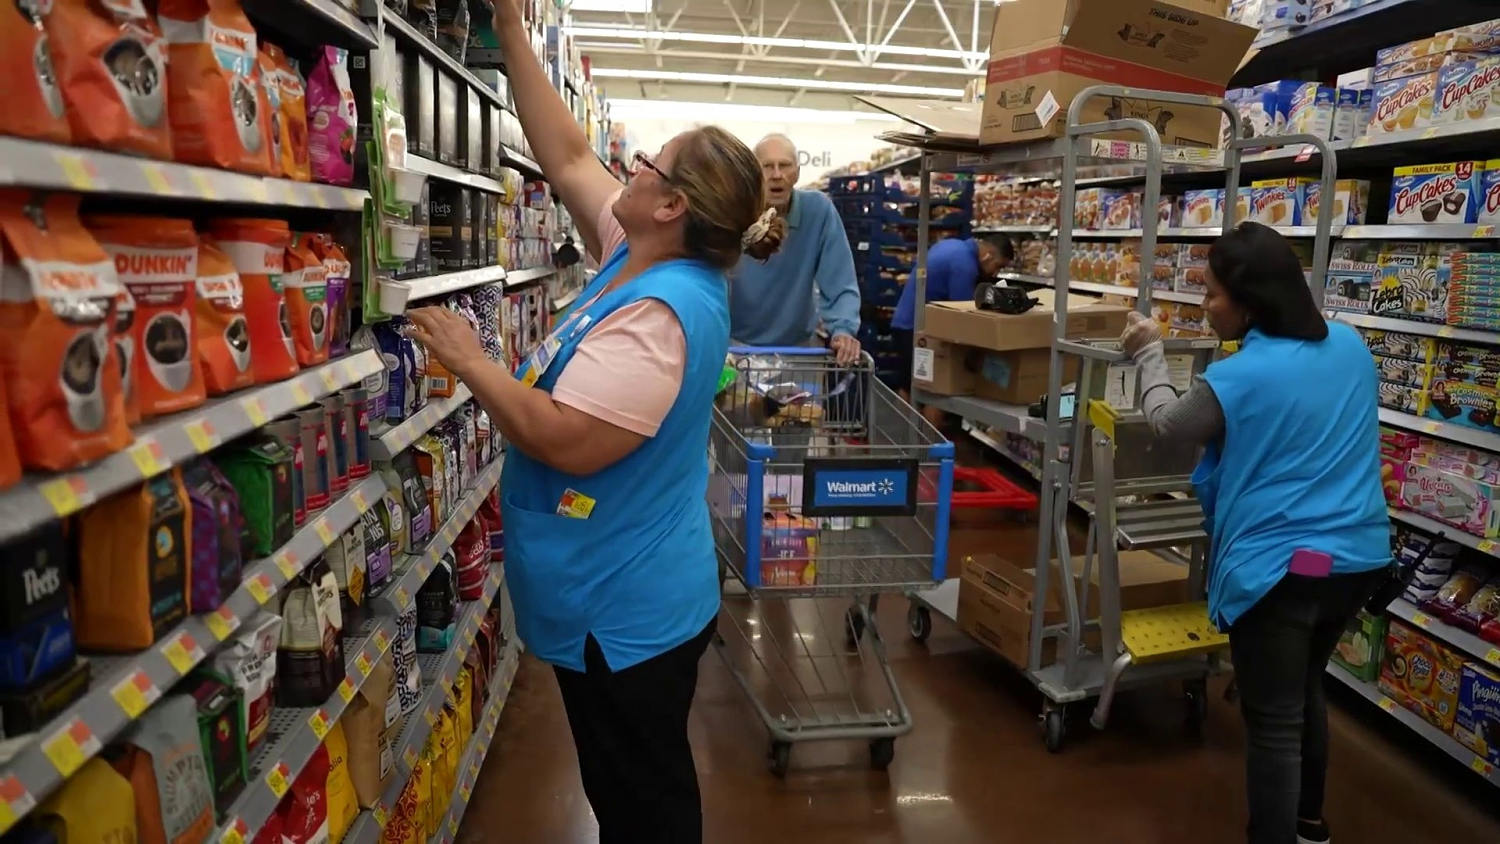 Walmart using AI to streamline organization – what will it mean for workers?